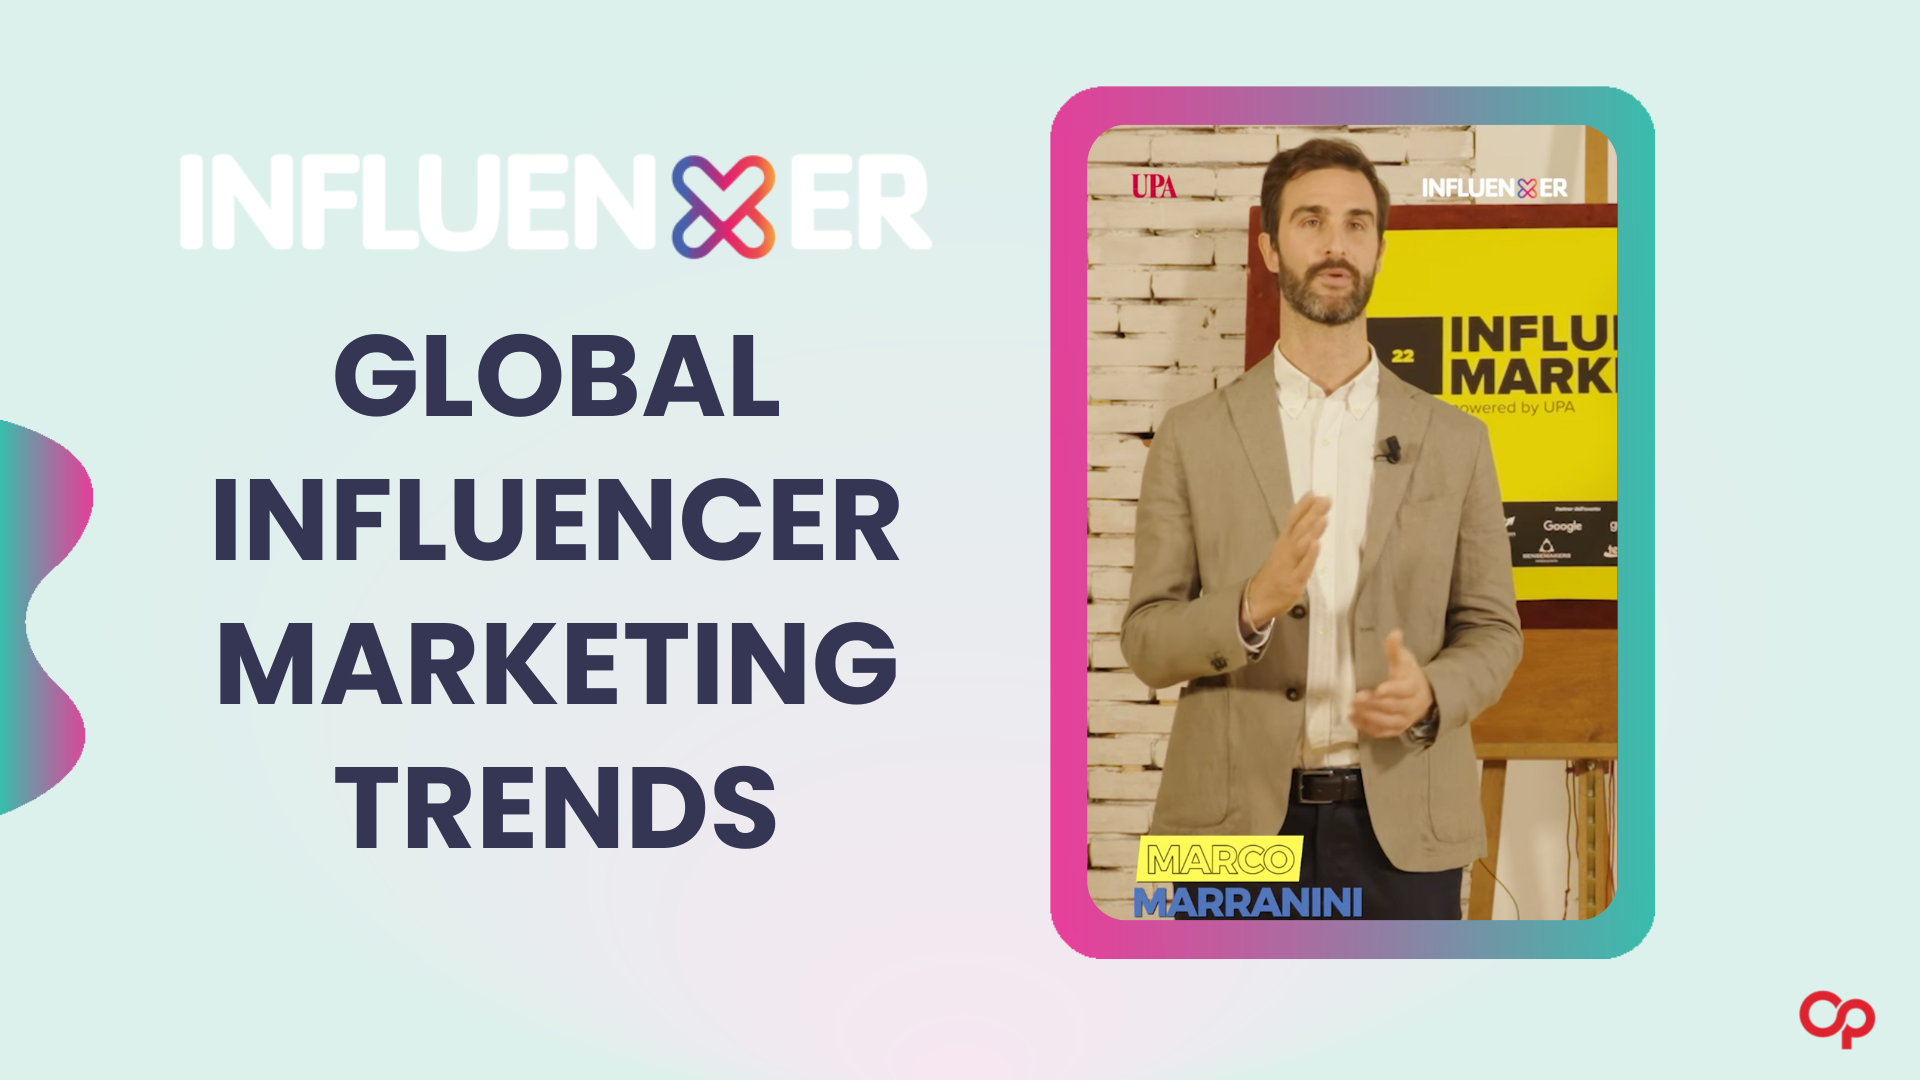 Global influencer marketing trends from Italy